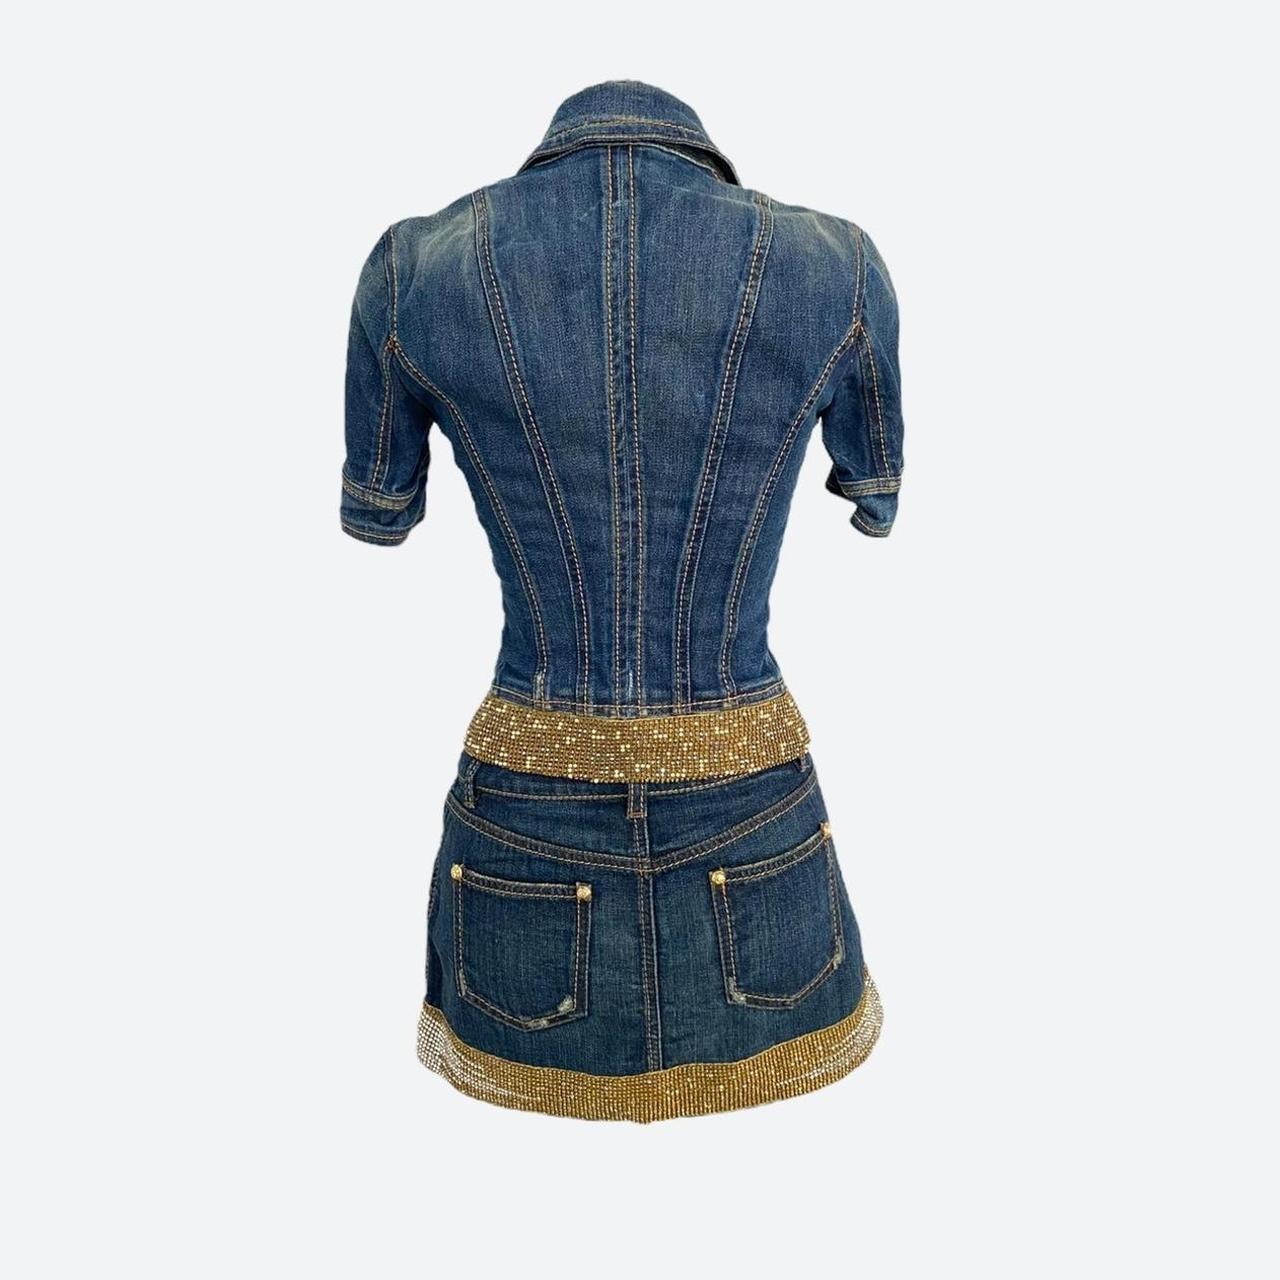 Mini skirt and short-sleeve jacket two-piece set in cotton denim with gold, rhinestone and bead embellishments on the hems of both pieces. The sparkling details on the hems provide an elevated, glamorous style to the edgy essence of denim. 

The